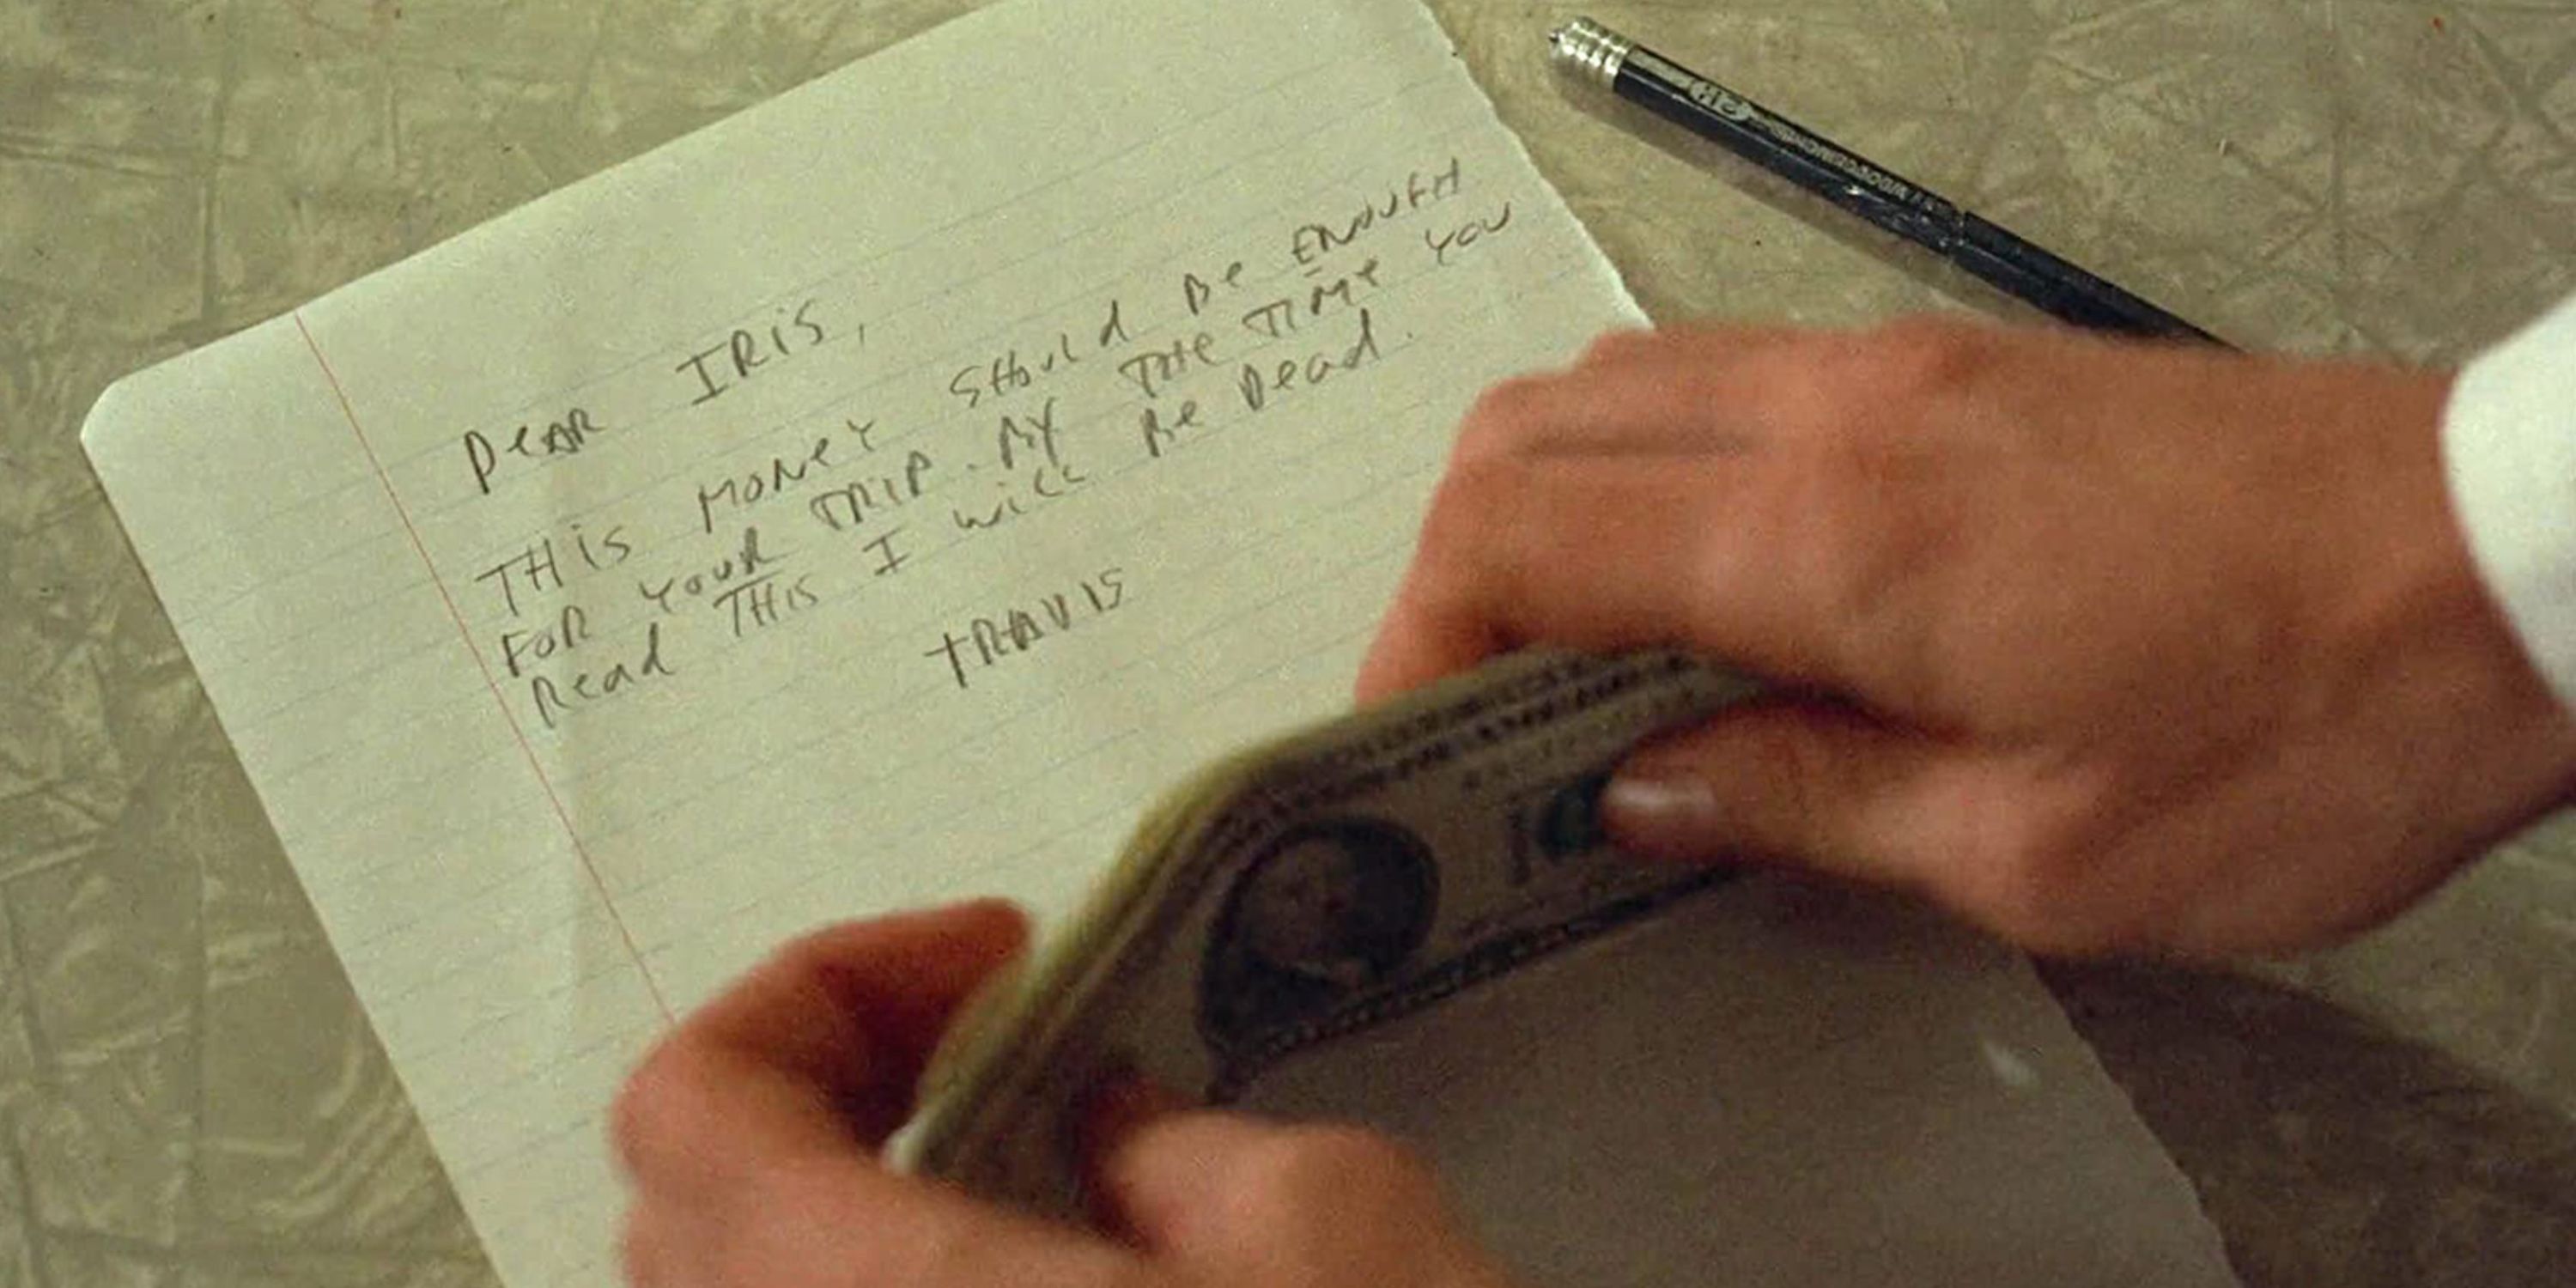 A shot of the note Travis leaves for Iris at the end of Taxi Driver, along with the money he left her.